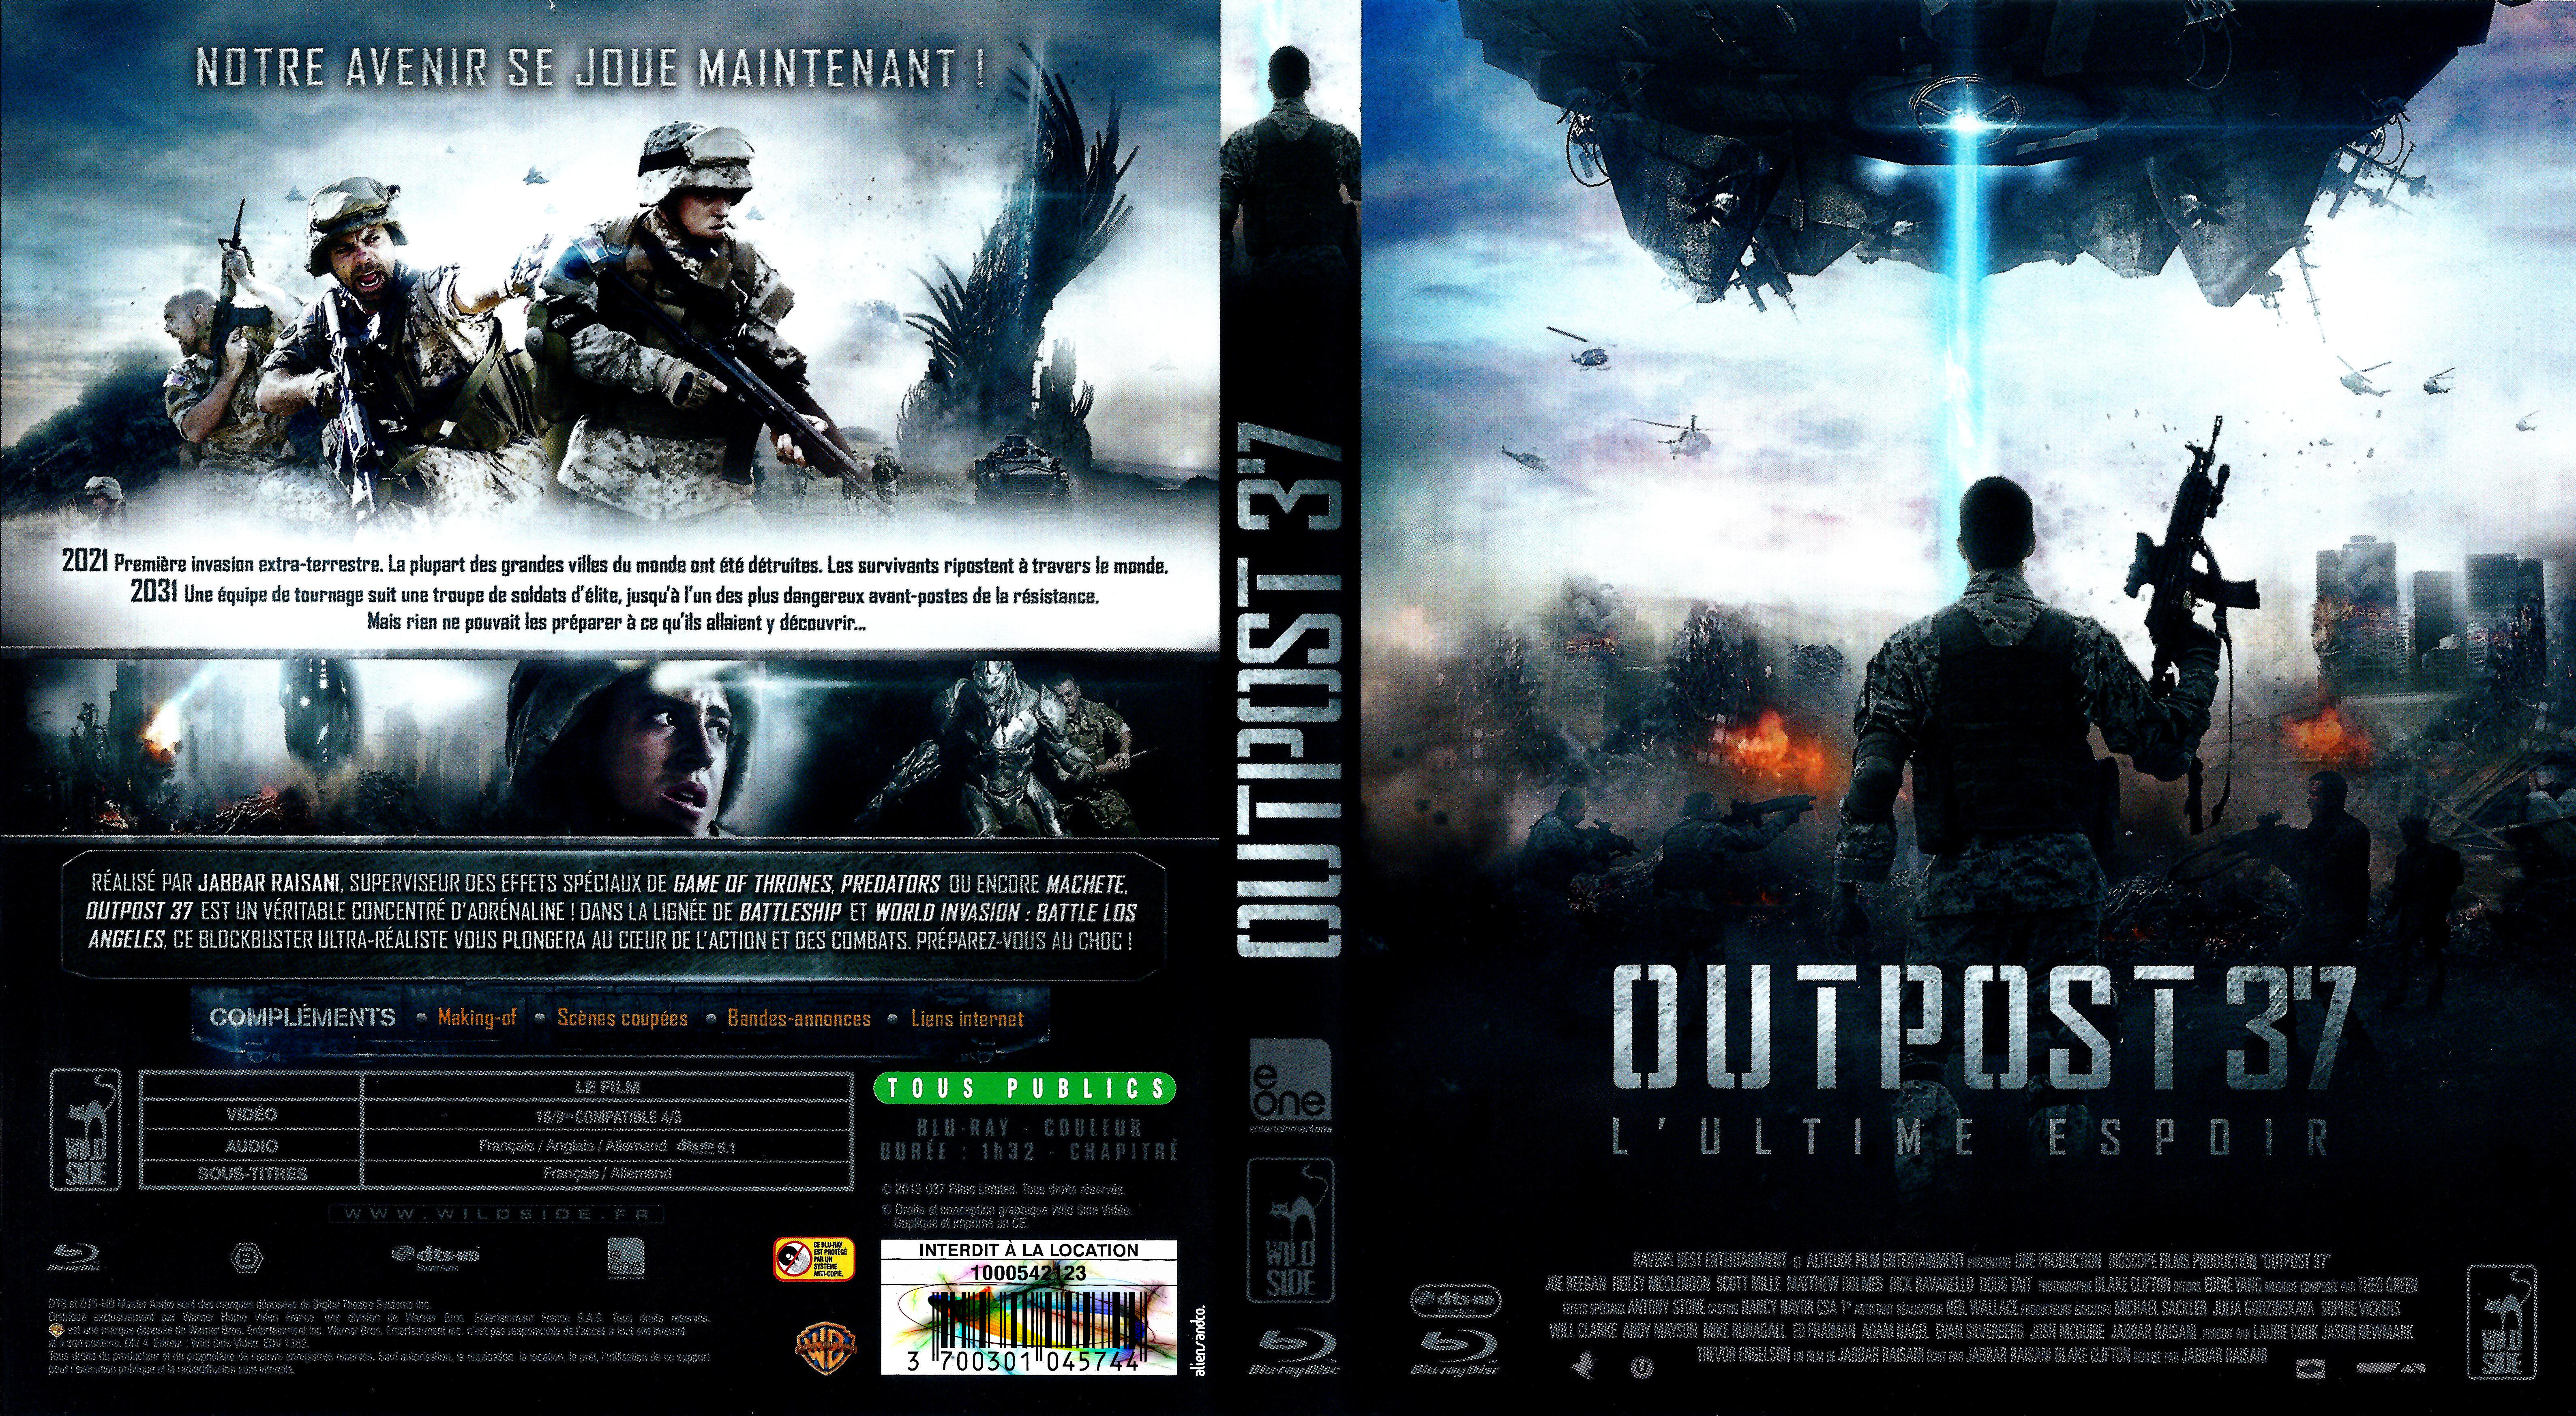 Jaquette DVD Outpost 37 (BLU-RAY)